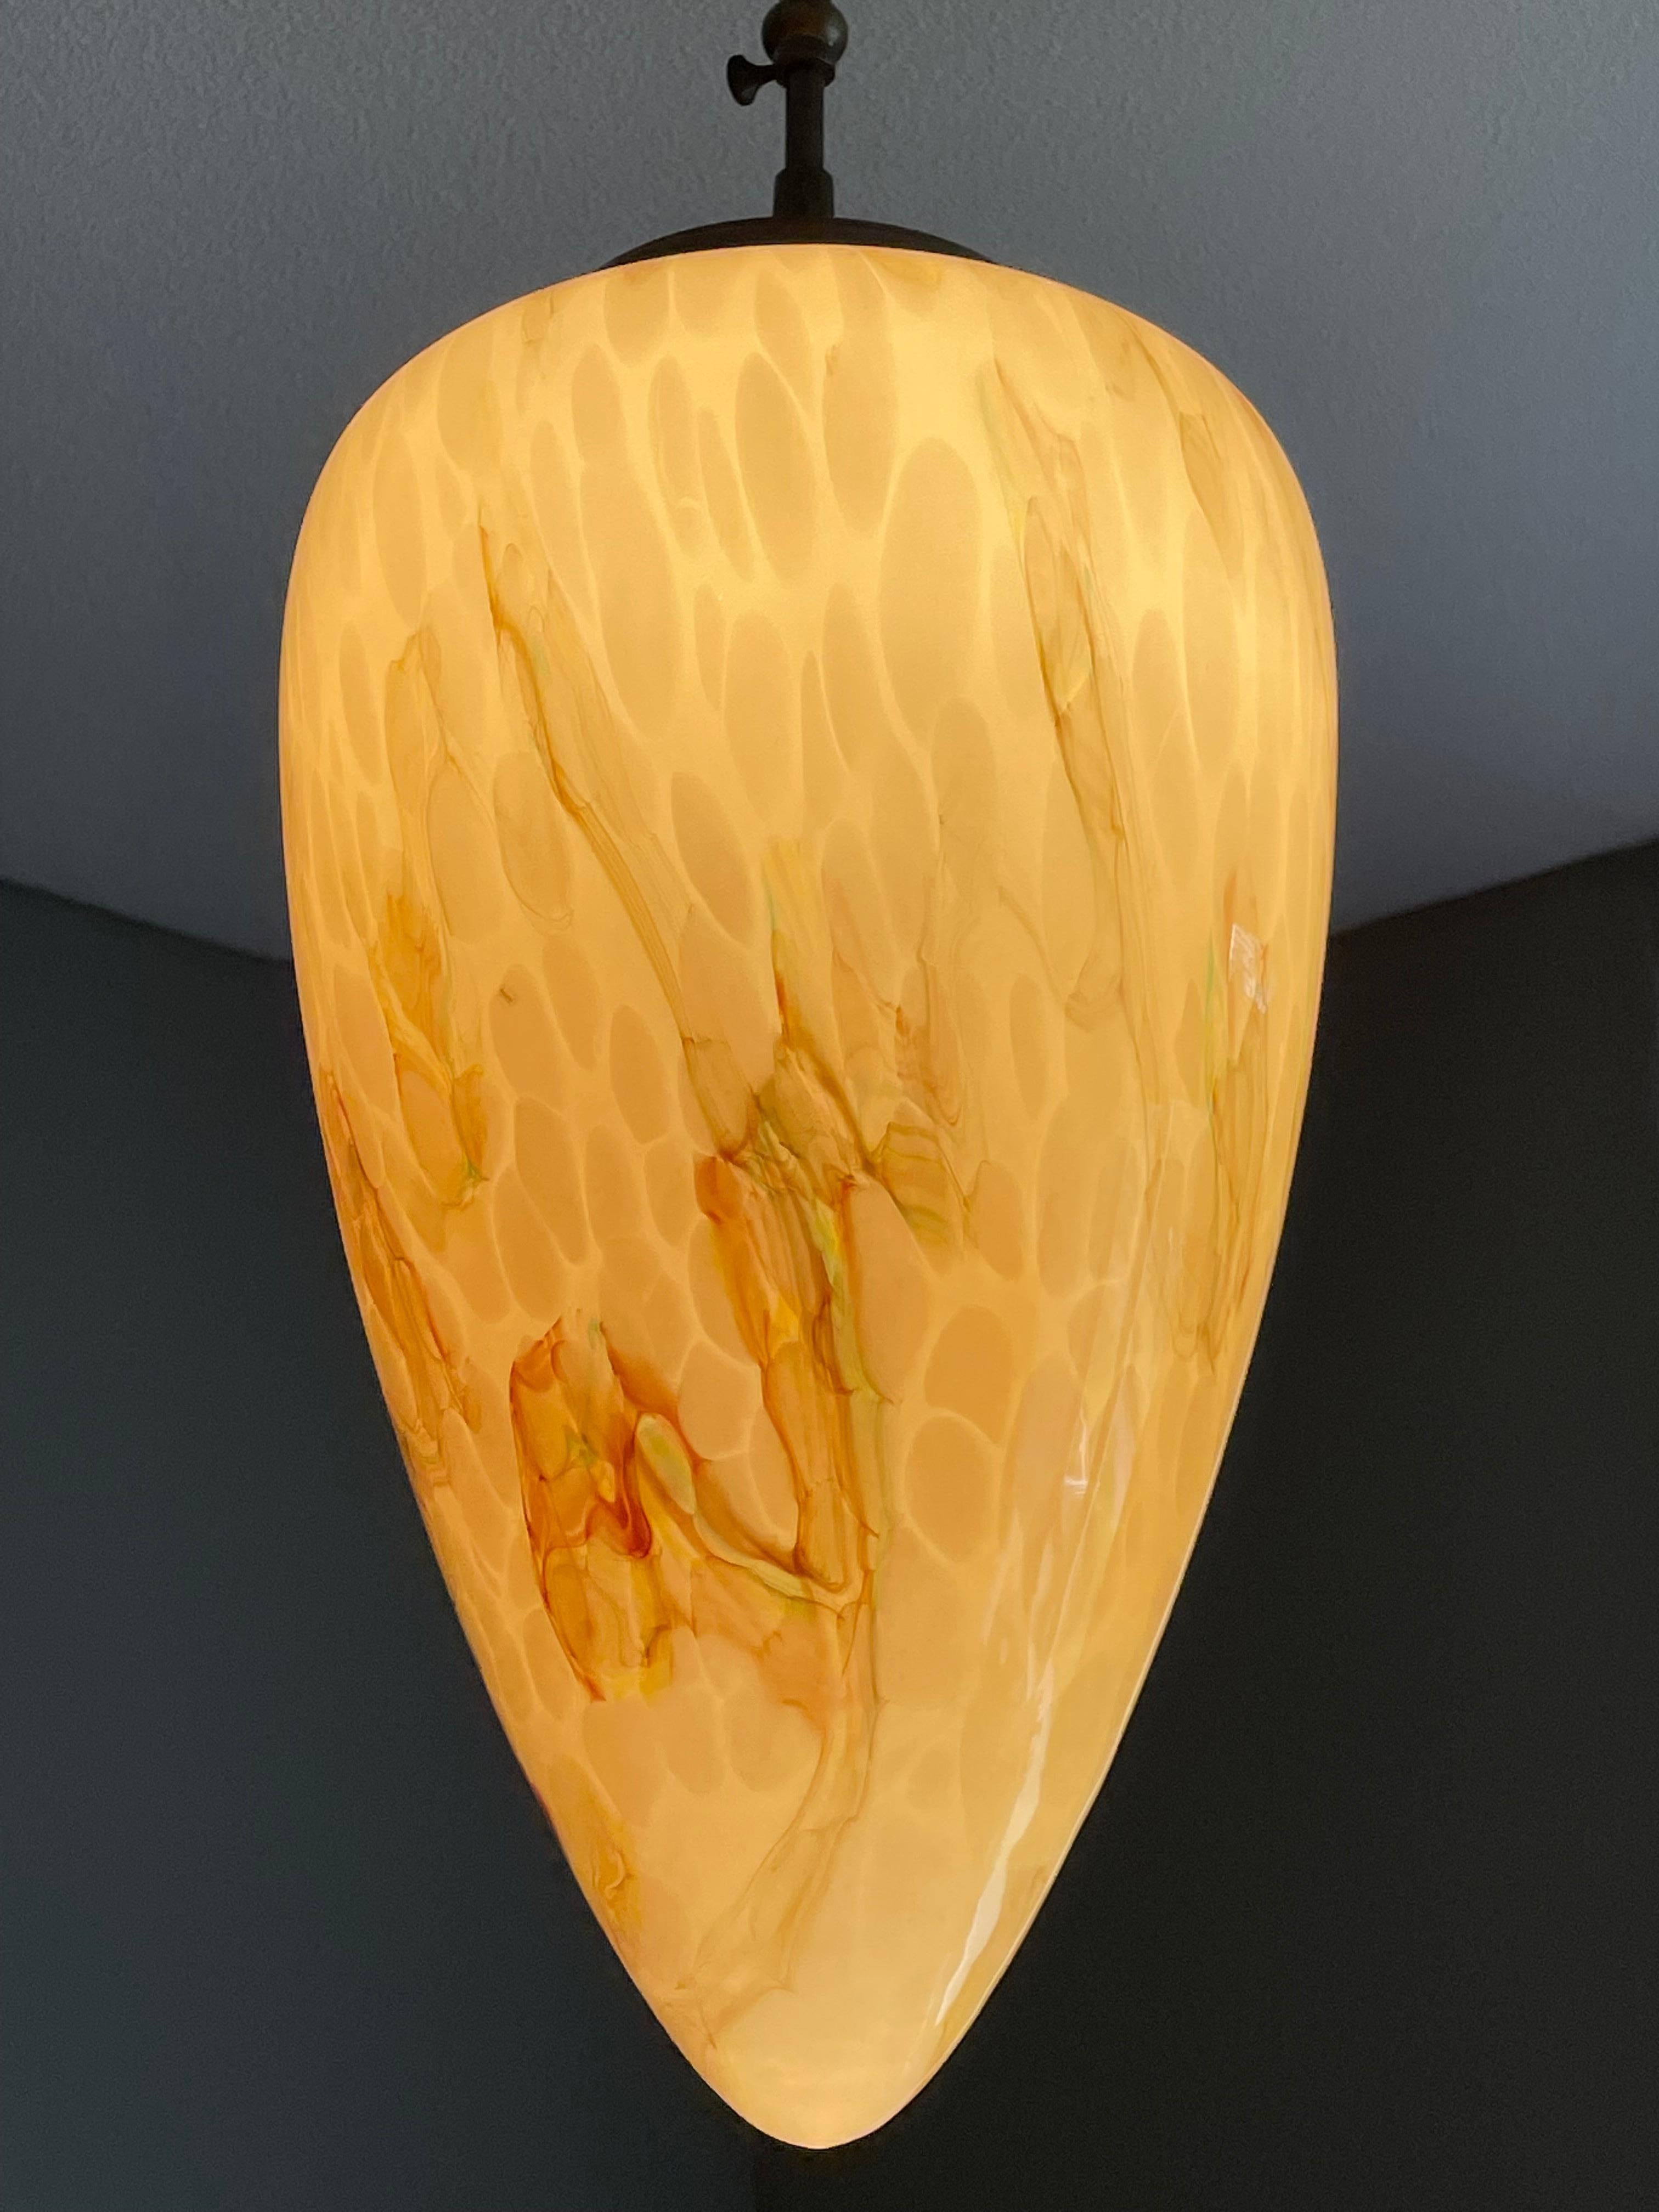 Large Size & Great Cone Shape Midcentury Made Art Deco Style Glass Pendant Light For Sale 13